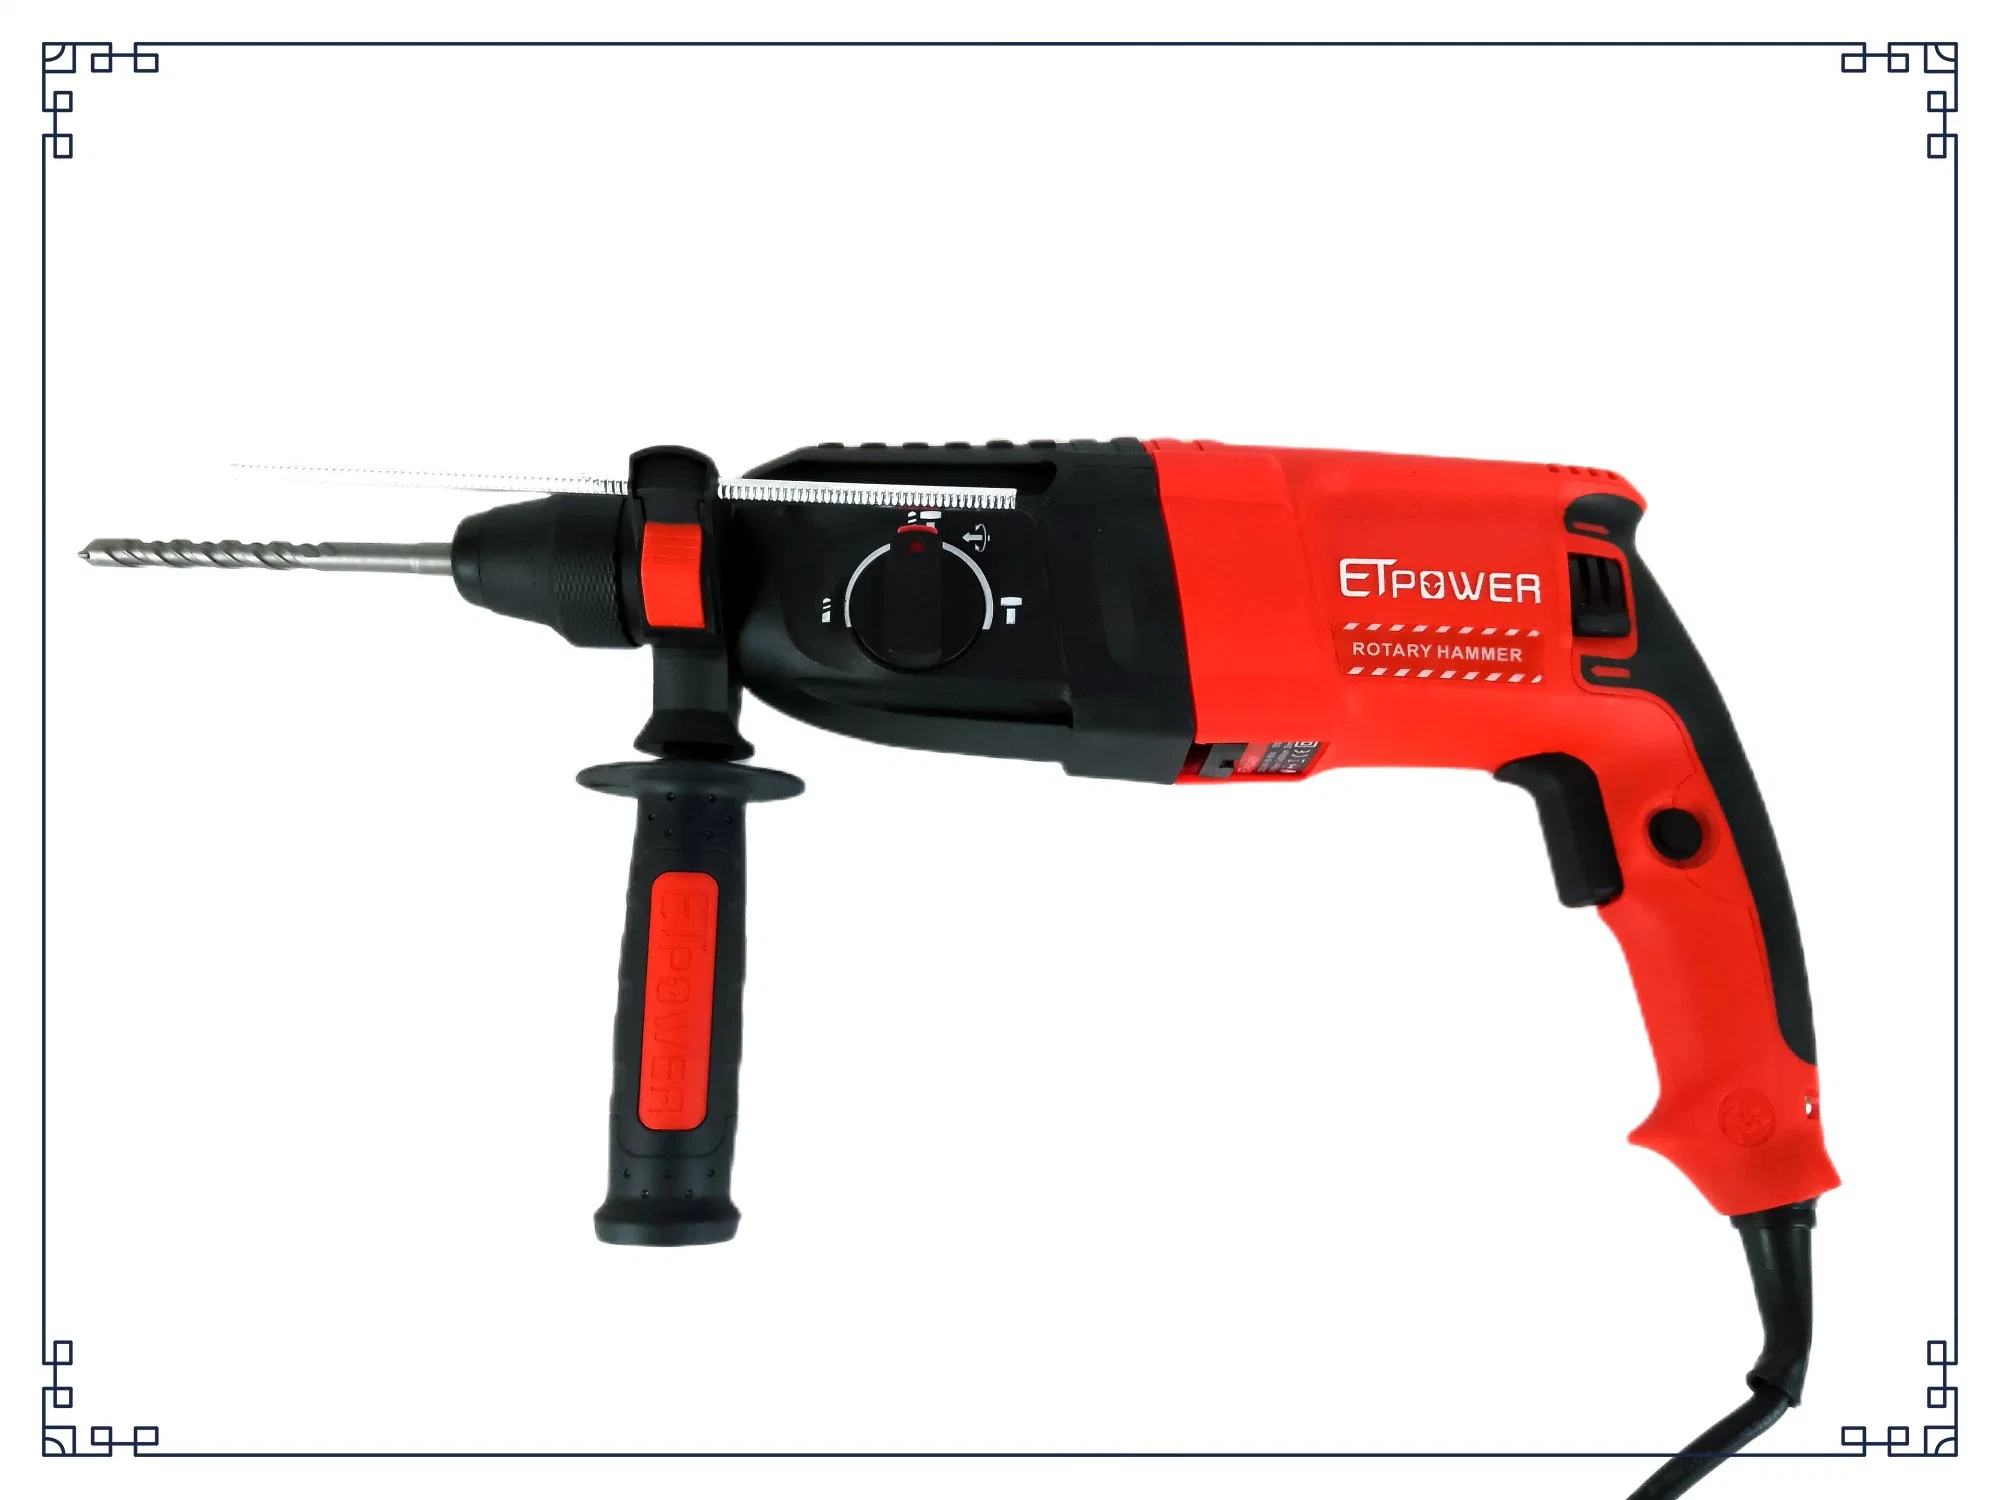 Professional Power Tools Heavy Duty 900W 26mm Electric Rotary Hammer Drill Machine